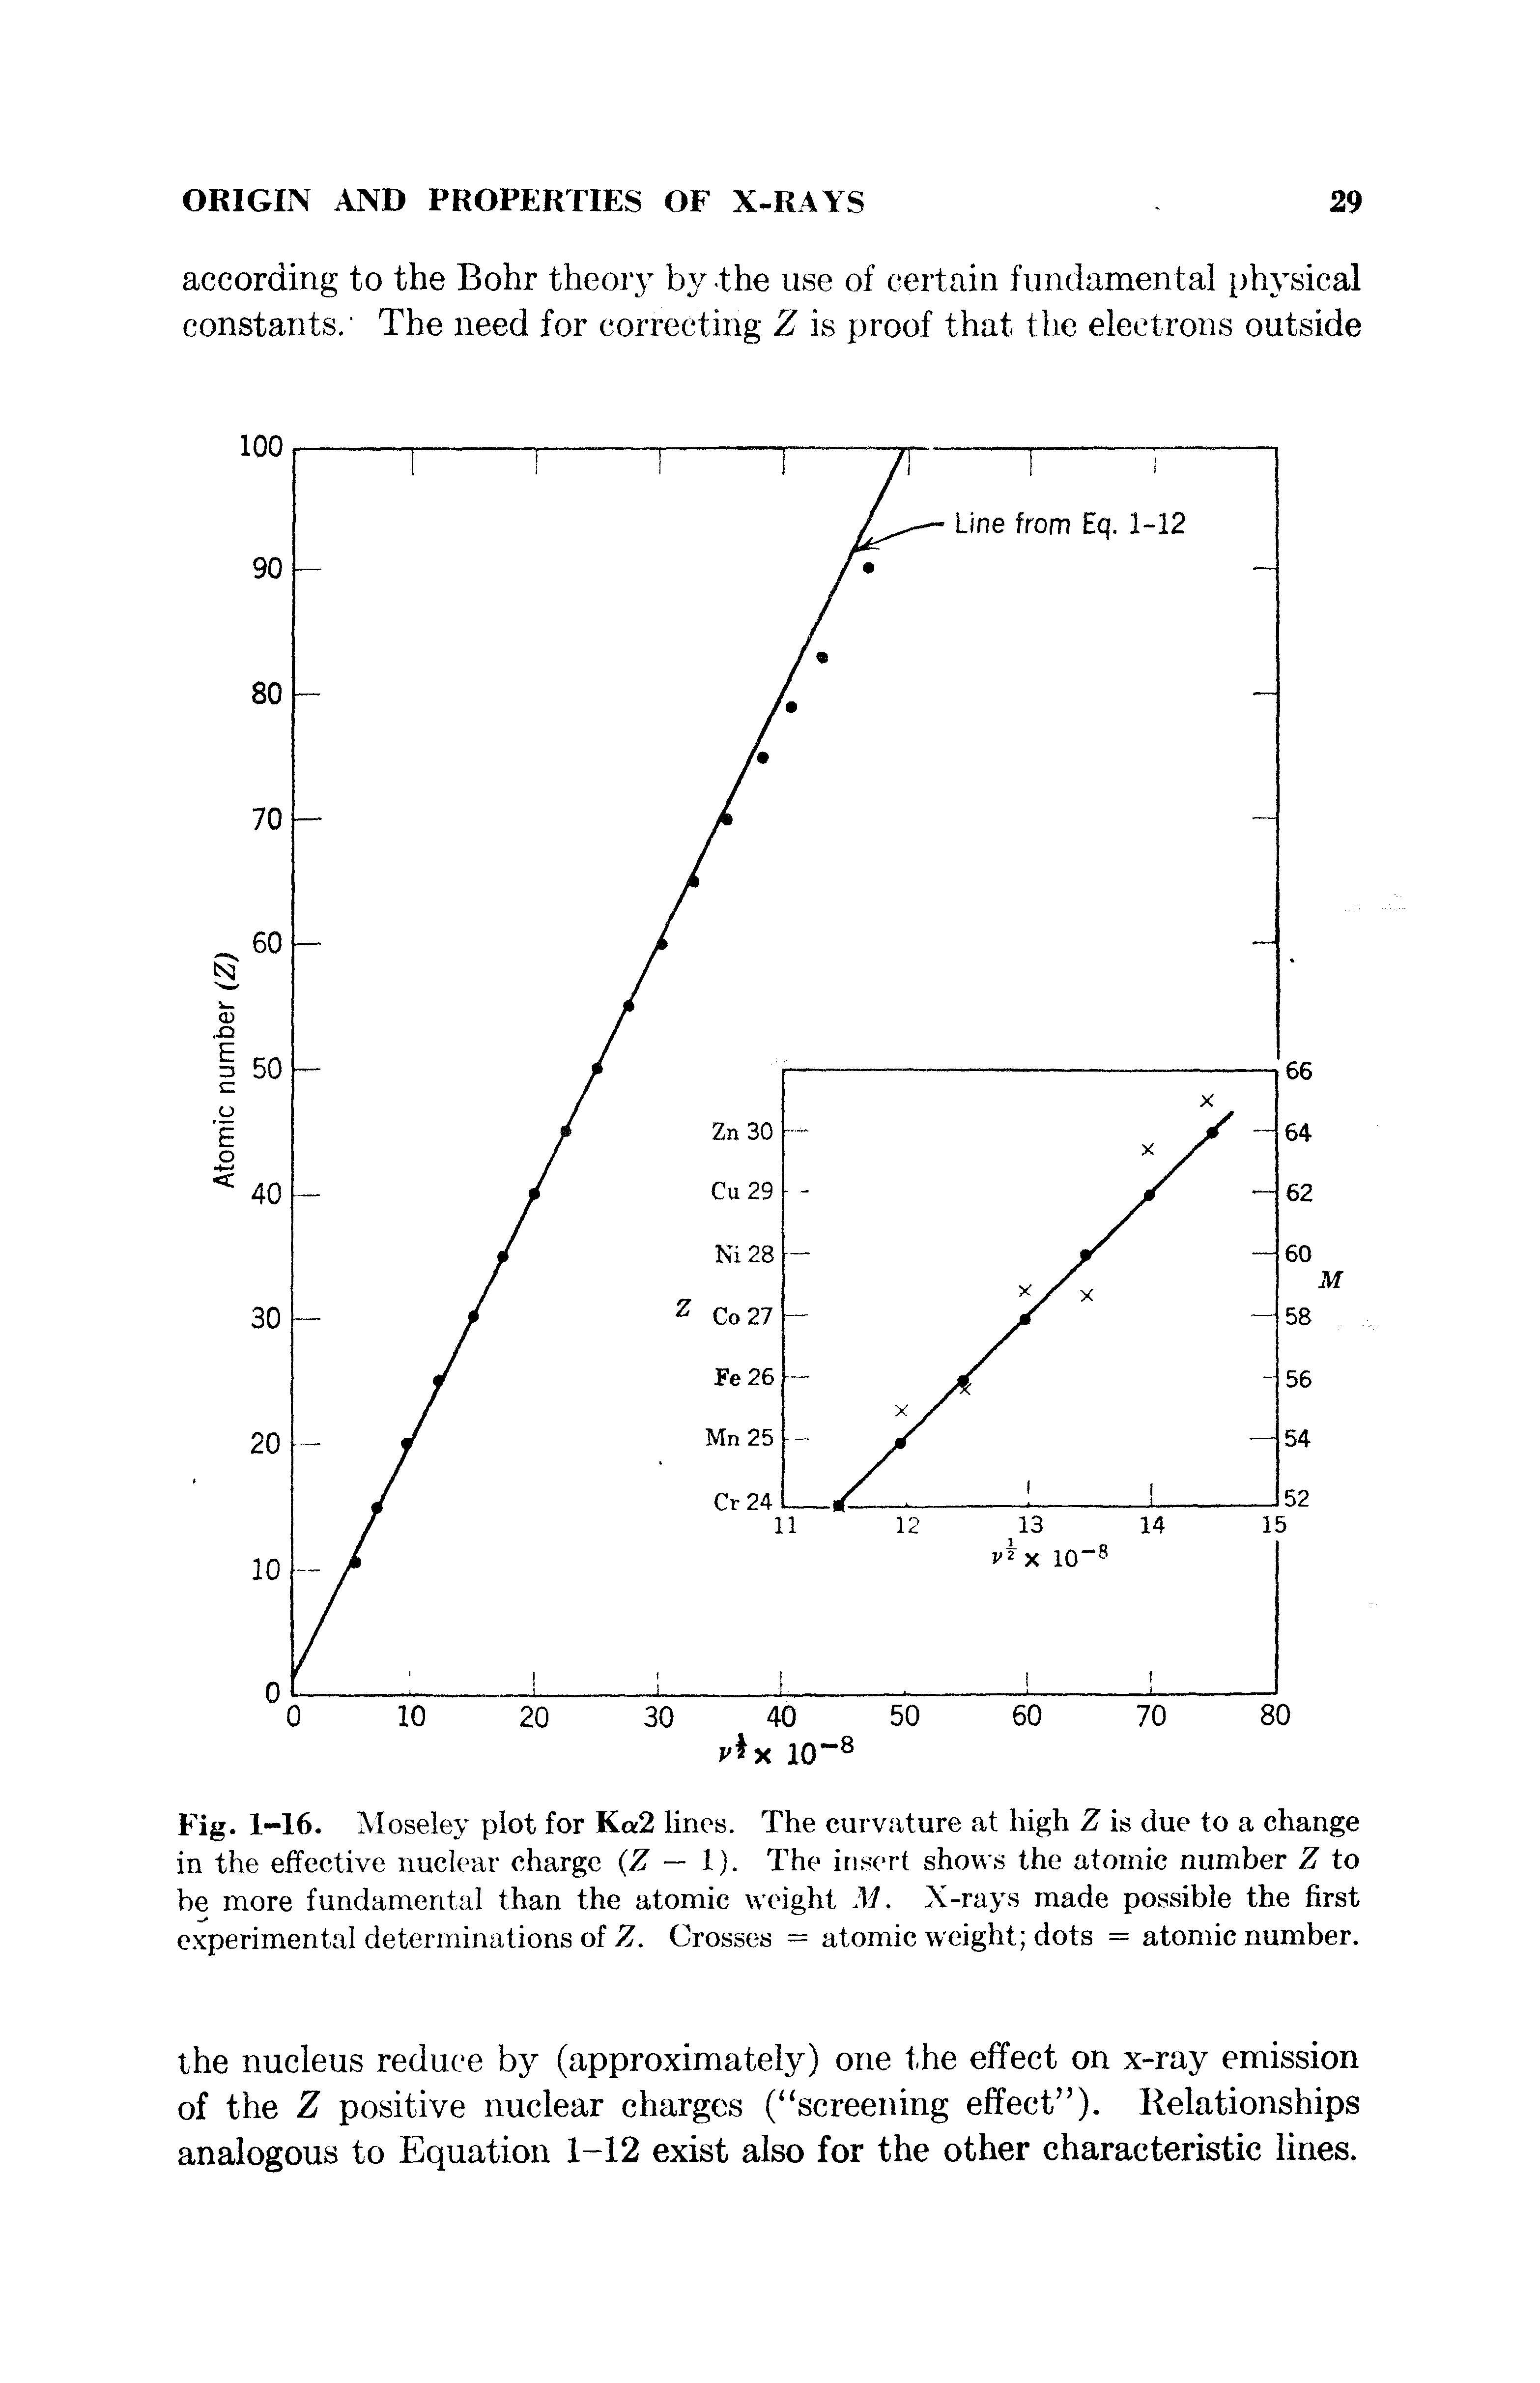 Fig. 1-16. Moseley plot for Ka2 lines. The curvature at high Z is due to a change in the effective nuclear charge (Z — 1). The insert shows the atomic number Z to be more fundamental than the atomic weight M. X-rays made possible the first experimental determinations of Z. Crosses = atomic weight dots = atomic number.